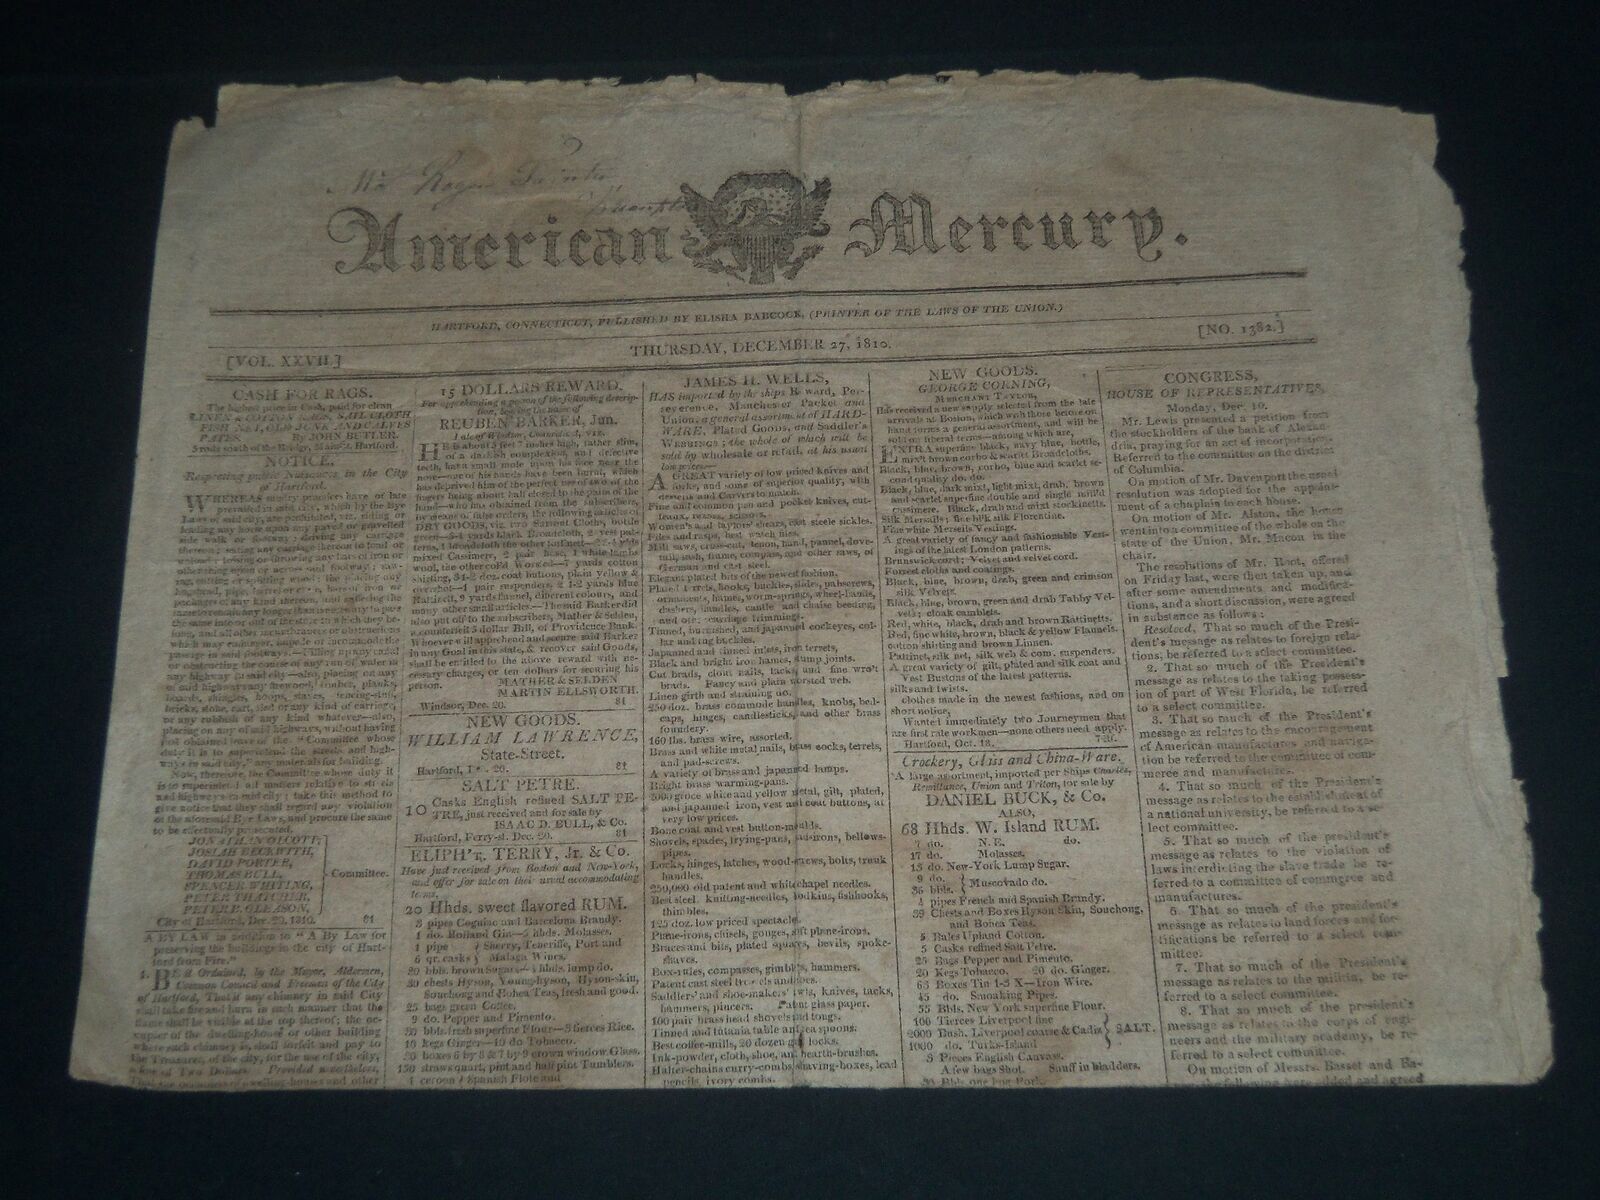 1810 DEC 27 AMERICAN MERCURY NEWSPAPER - HARTFORD FIRE INS. CO. FOUNDED- NP 3983